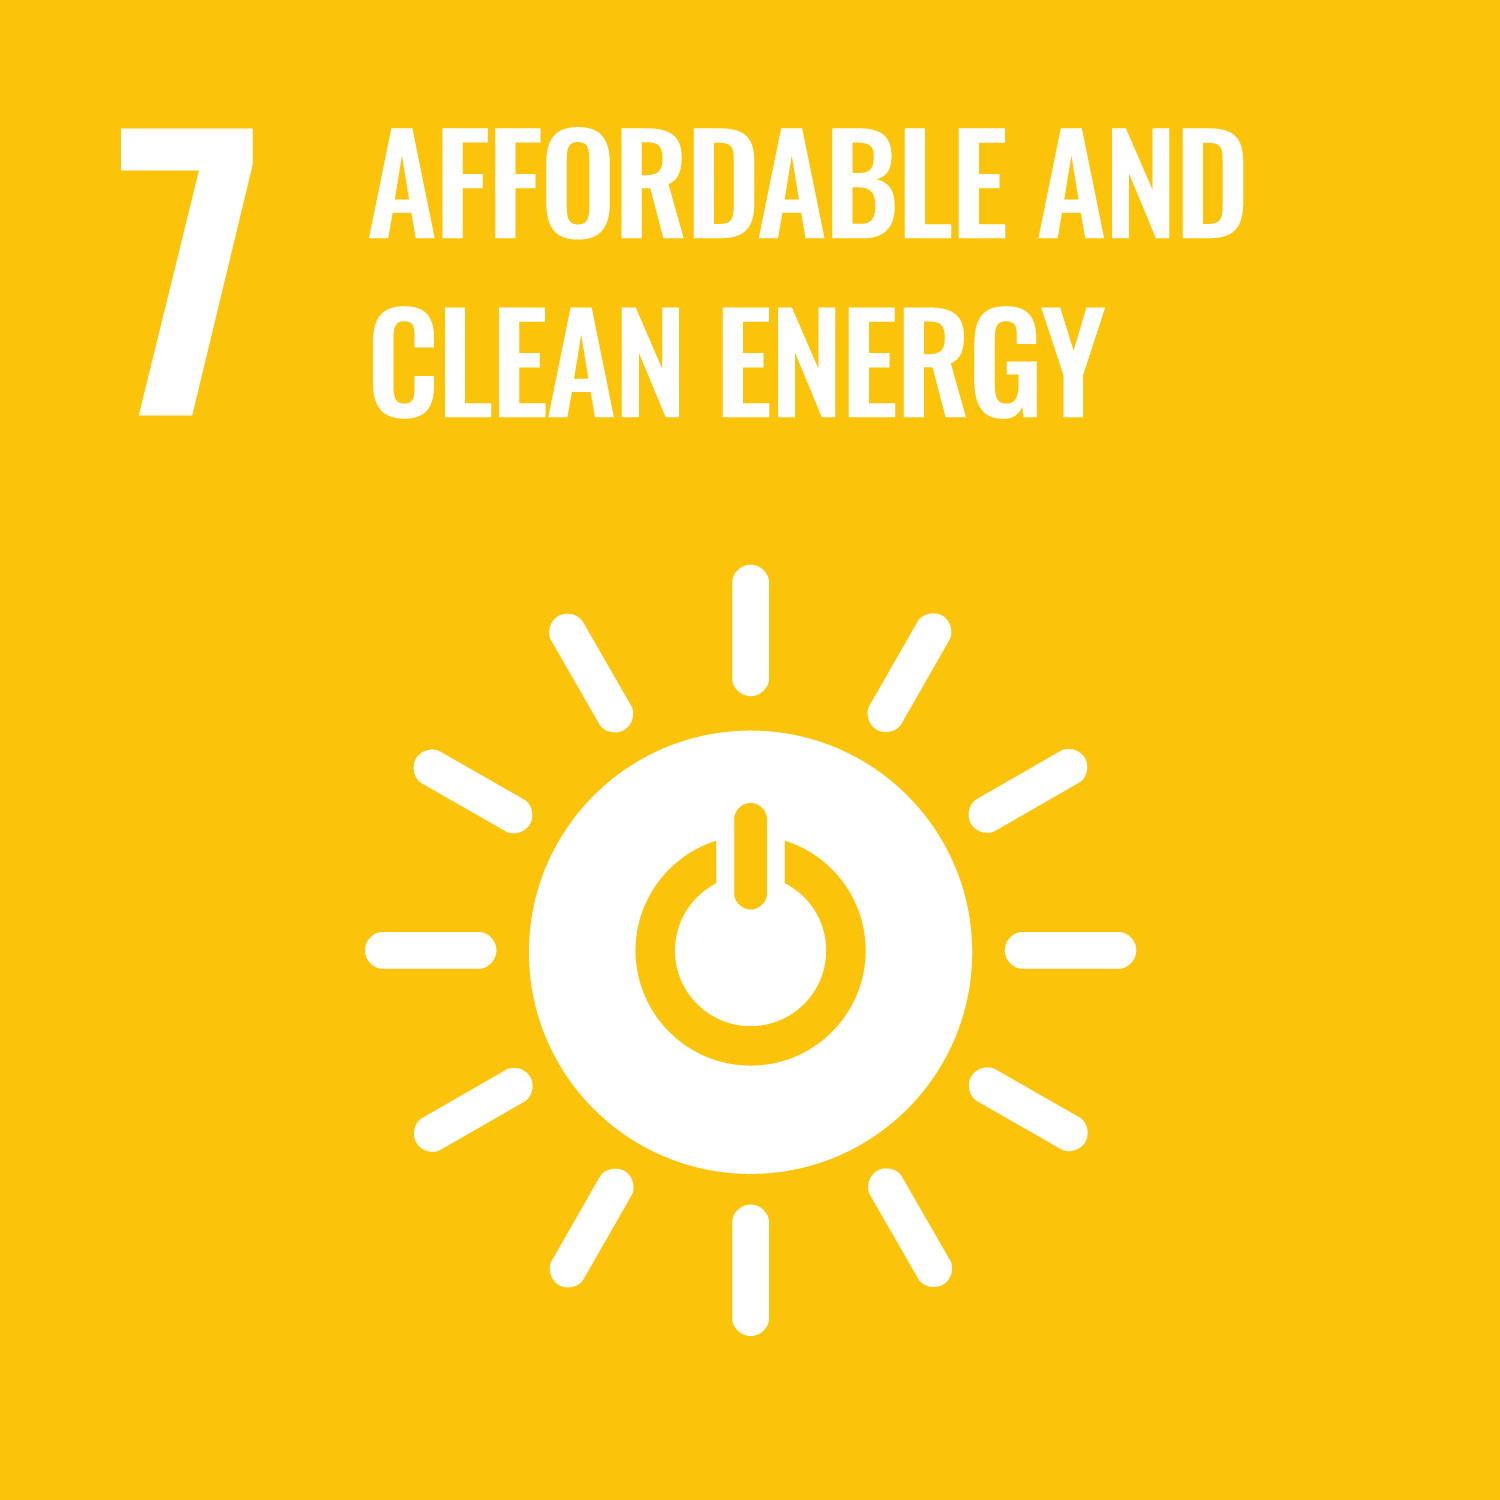 SDG 07 - Affordable and Clean Energy